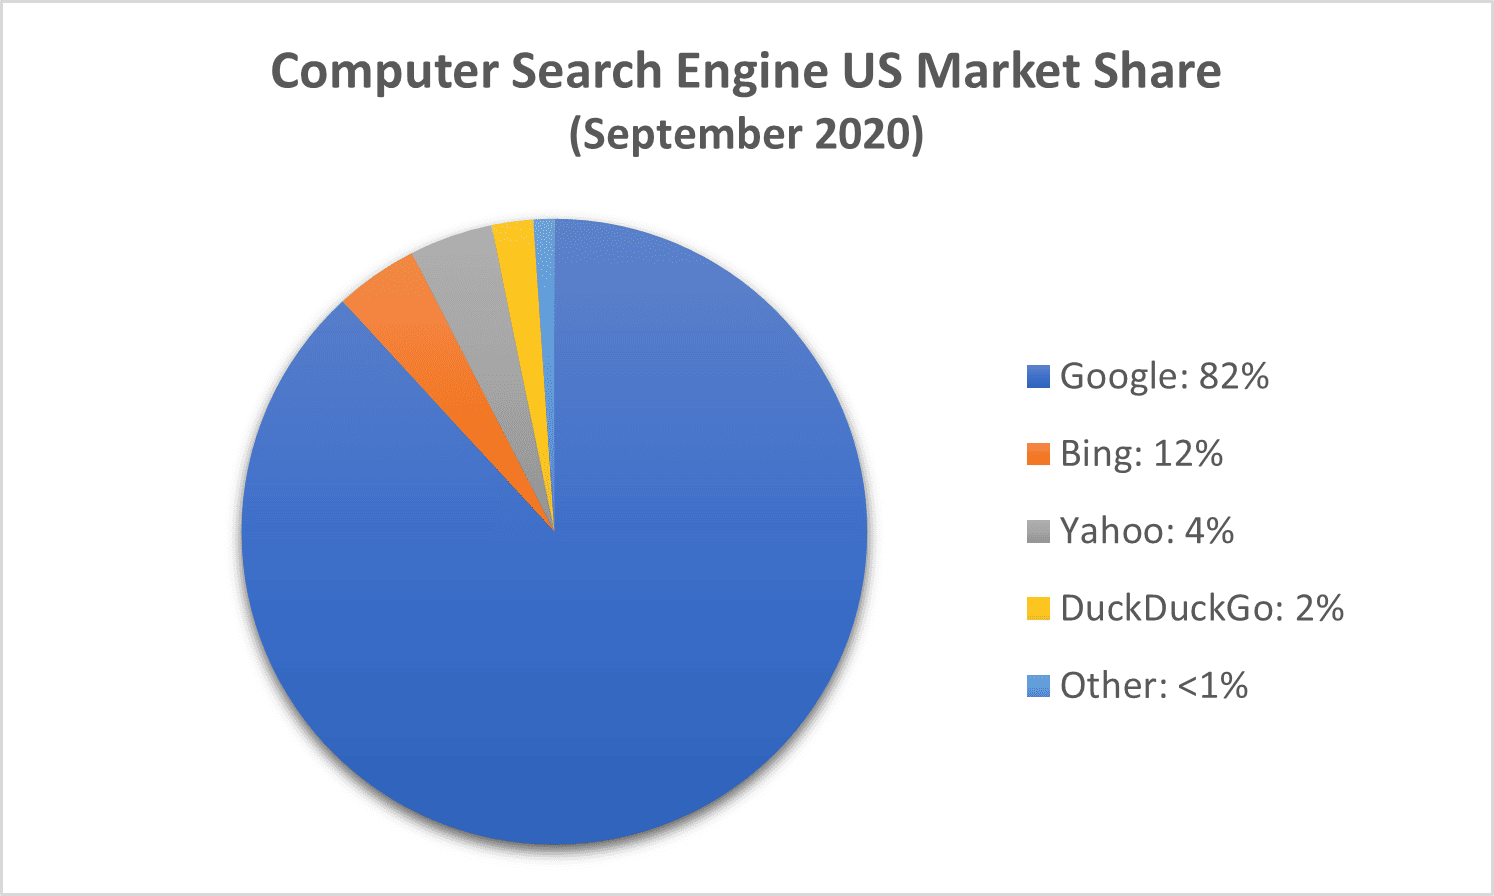 Computer search engine market share